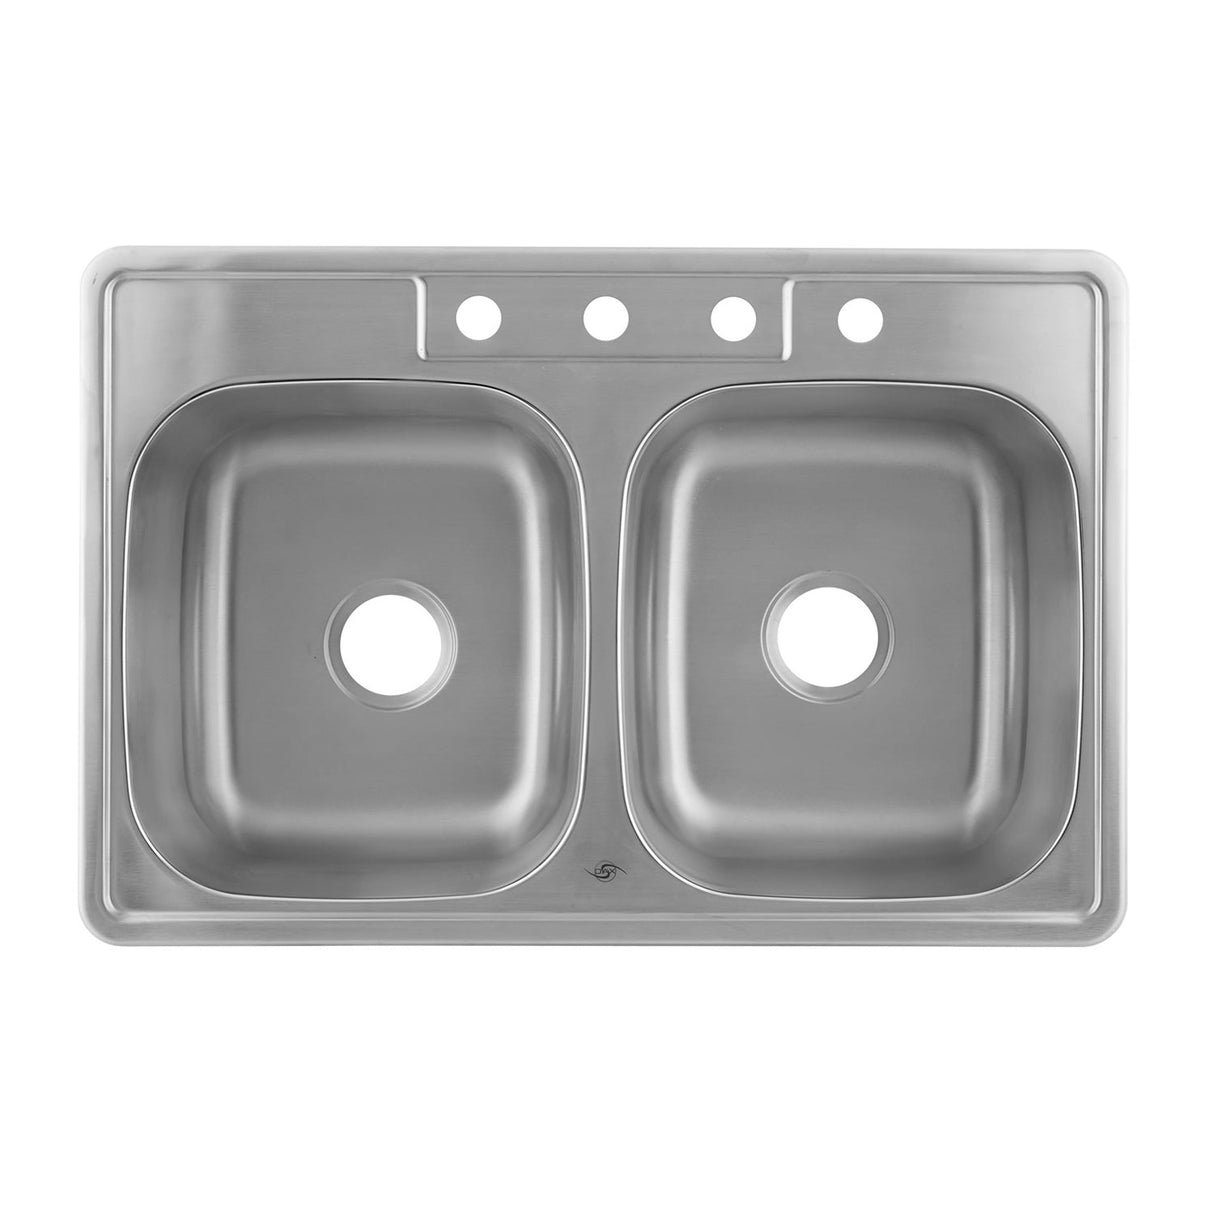 DAX Stainless Steel 50/ 50 Double Bowl Top Mount Kitchen Sink, Brushed Stainless Steel DAX-OM-3322